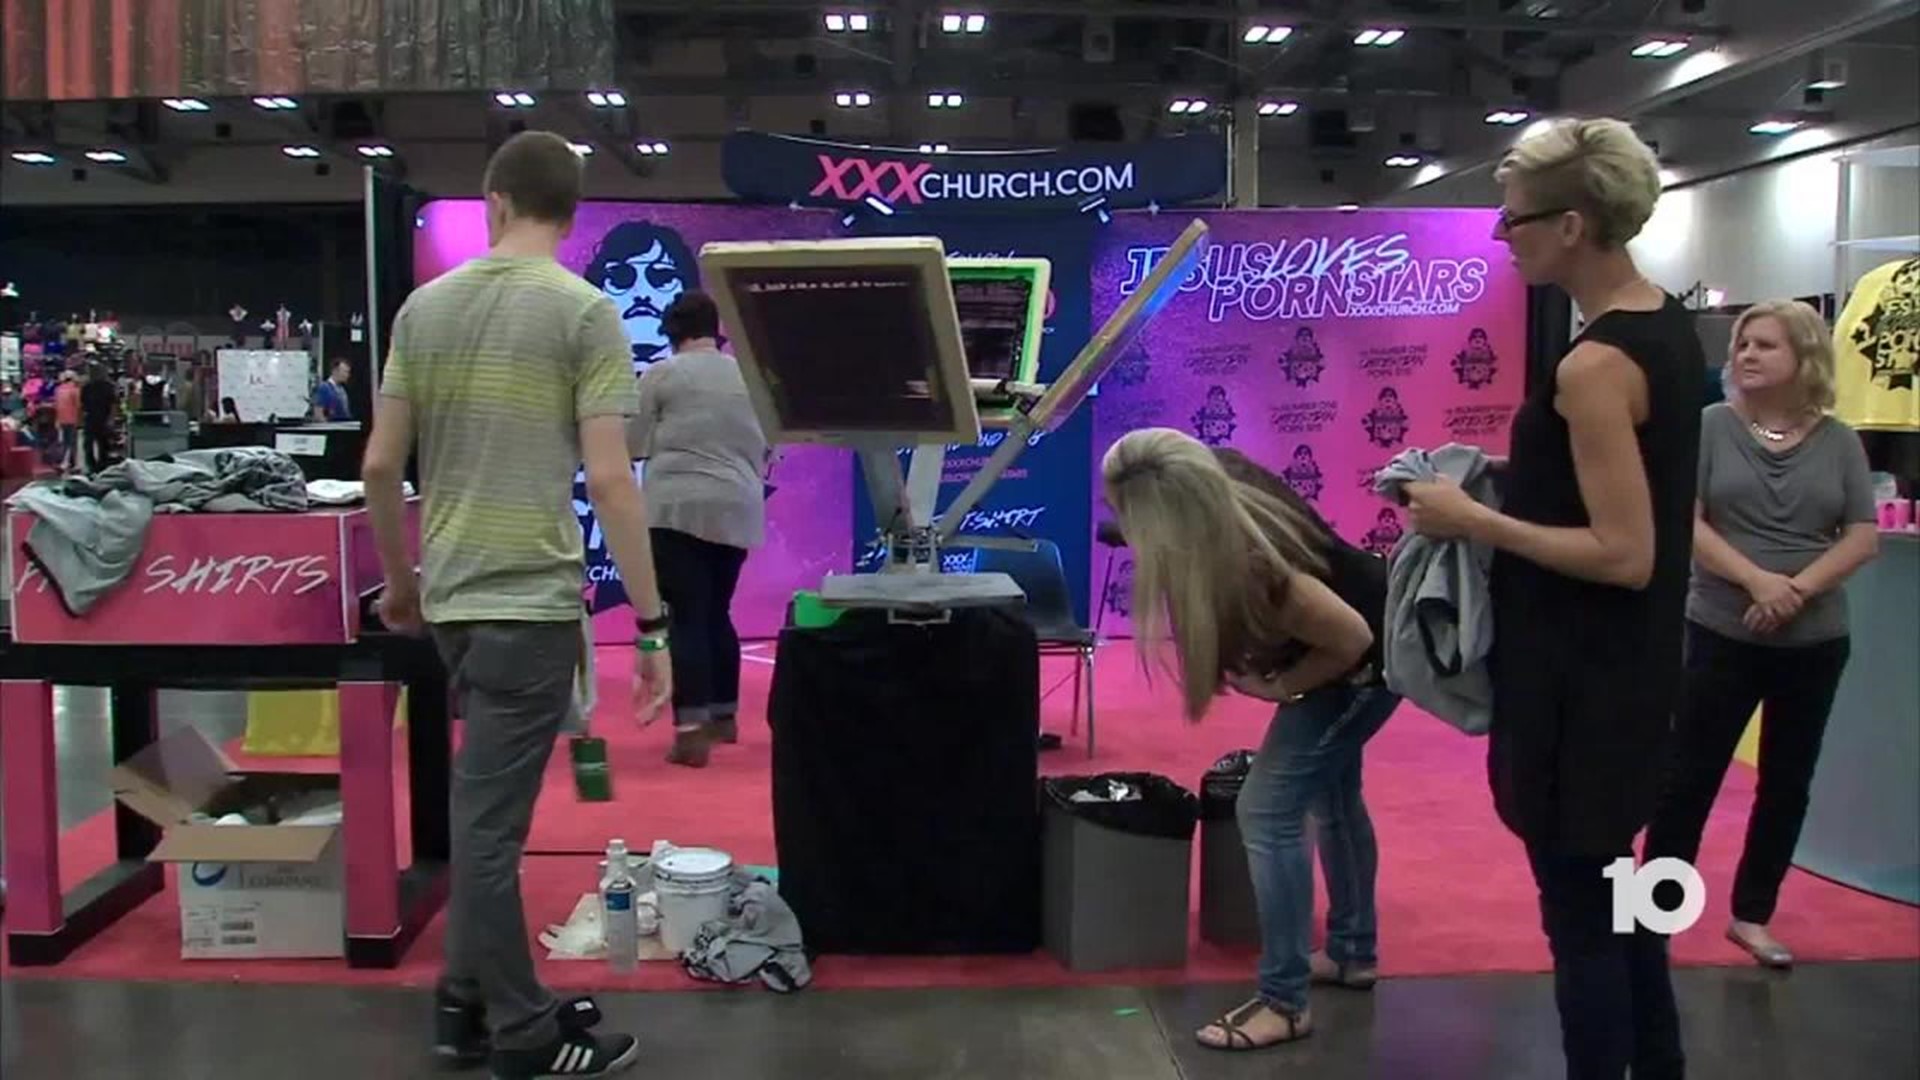 Porn Convention - Church uses adult entertainment conventions to share their message |  10tv.com